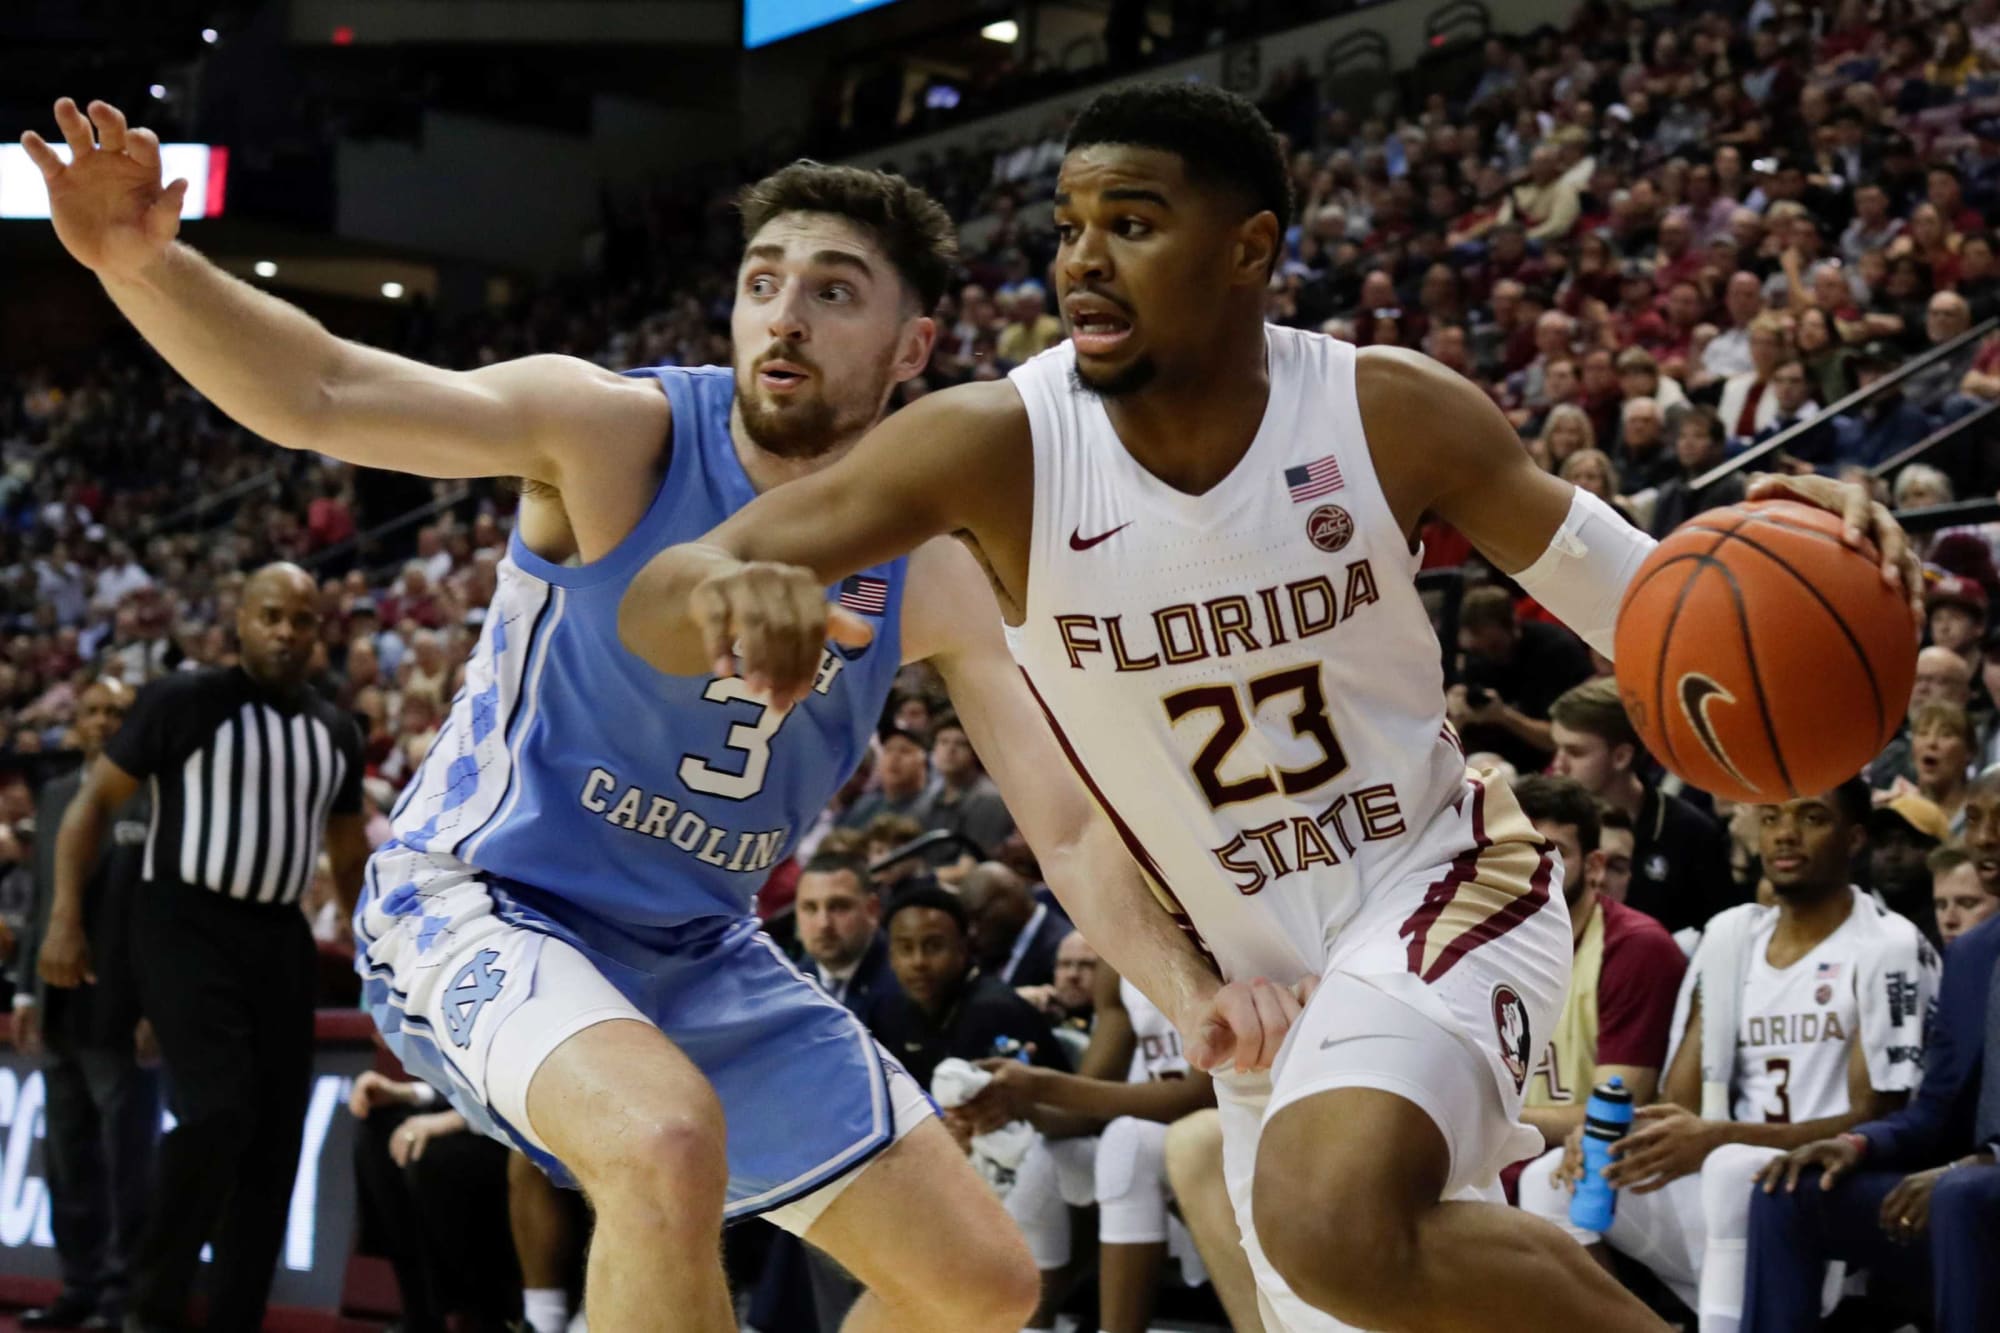 UNC Basketball vs. Florida State Game preview, info, prediction and more